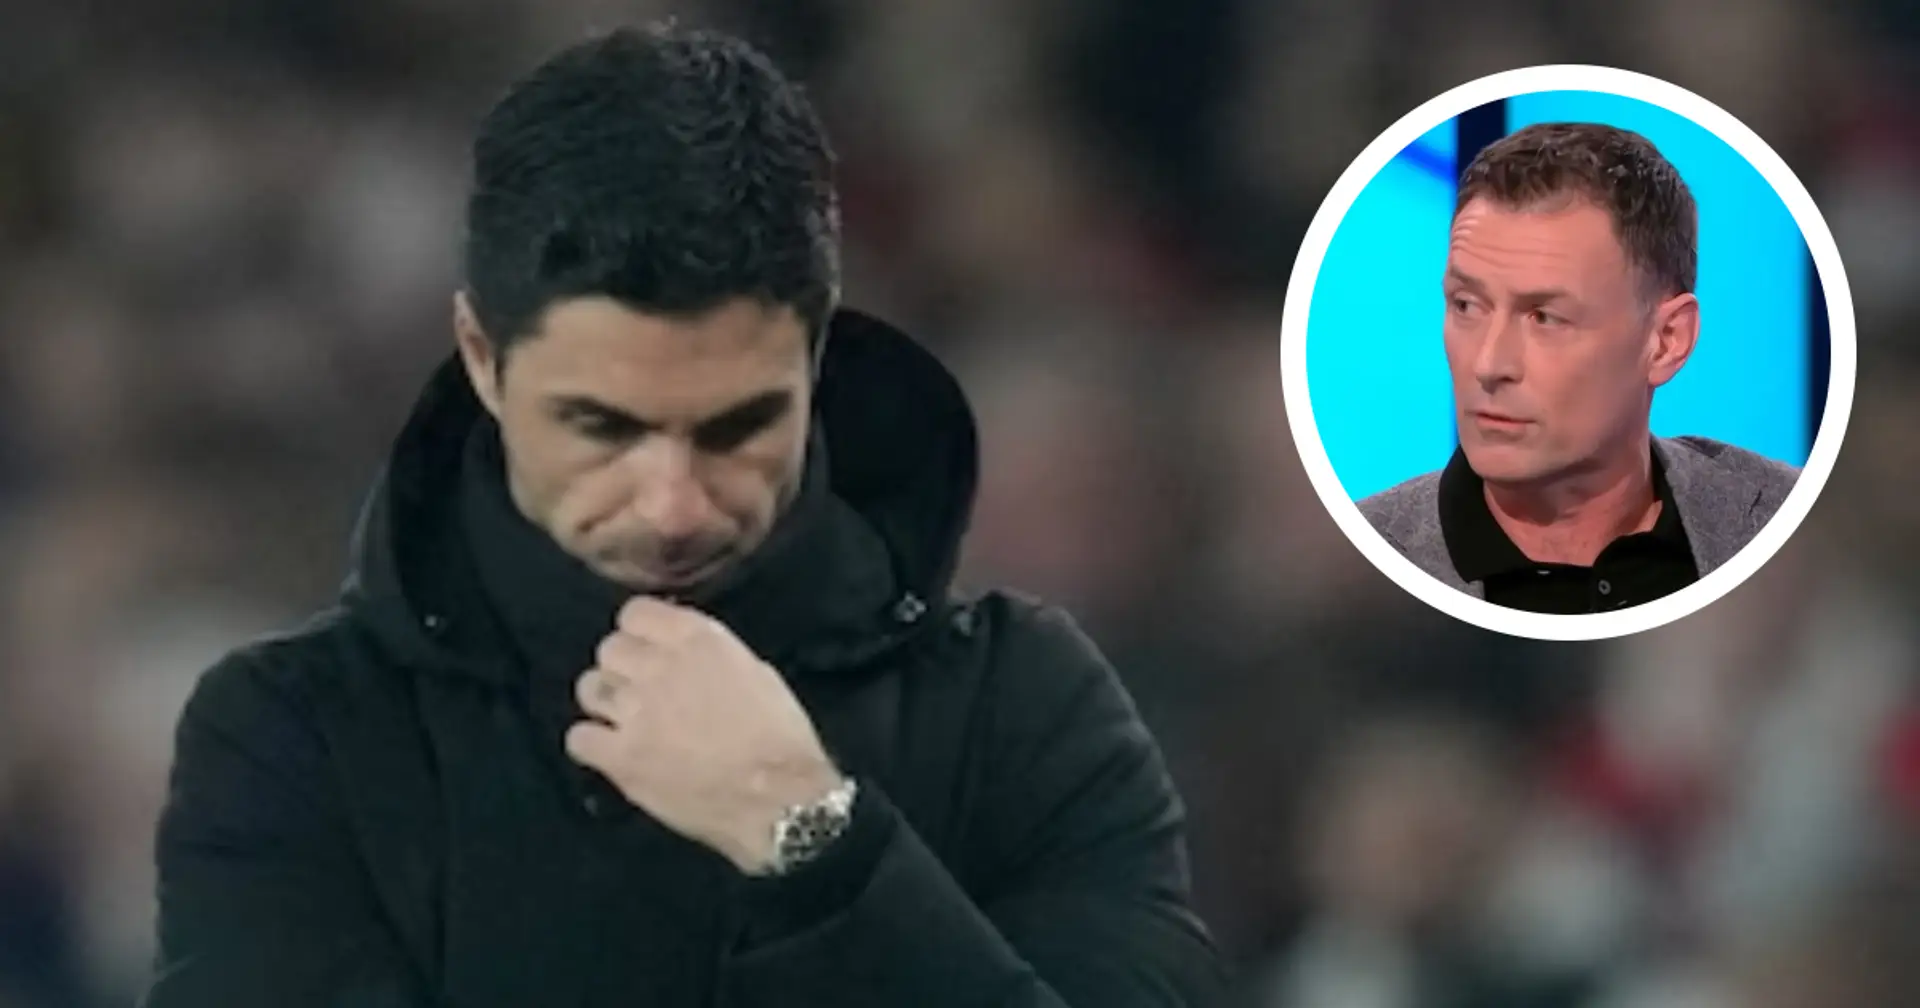 'Arsenal are playing this match at one of the worst possible moments': Chris Sutton makes Man City clash prediction